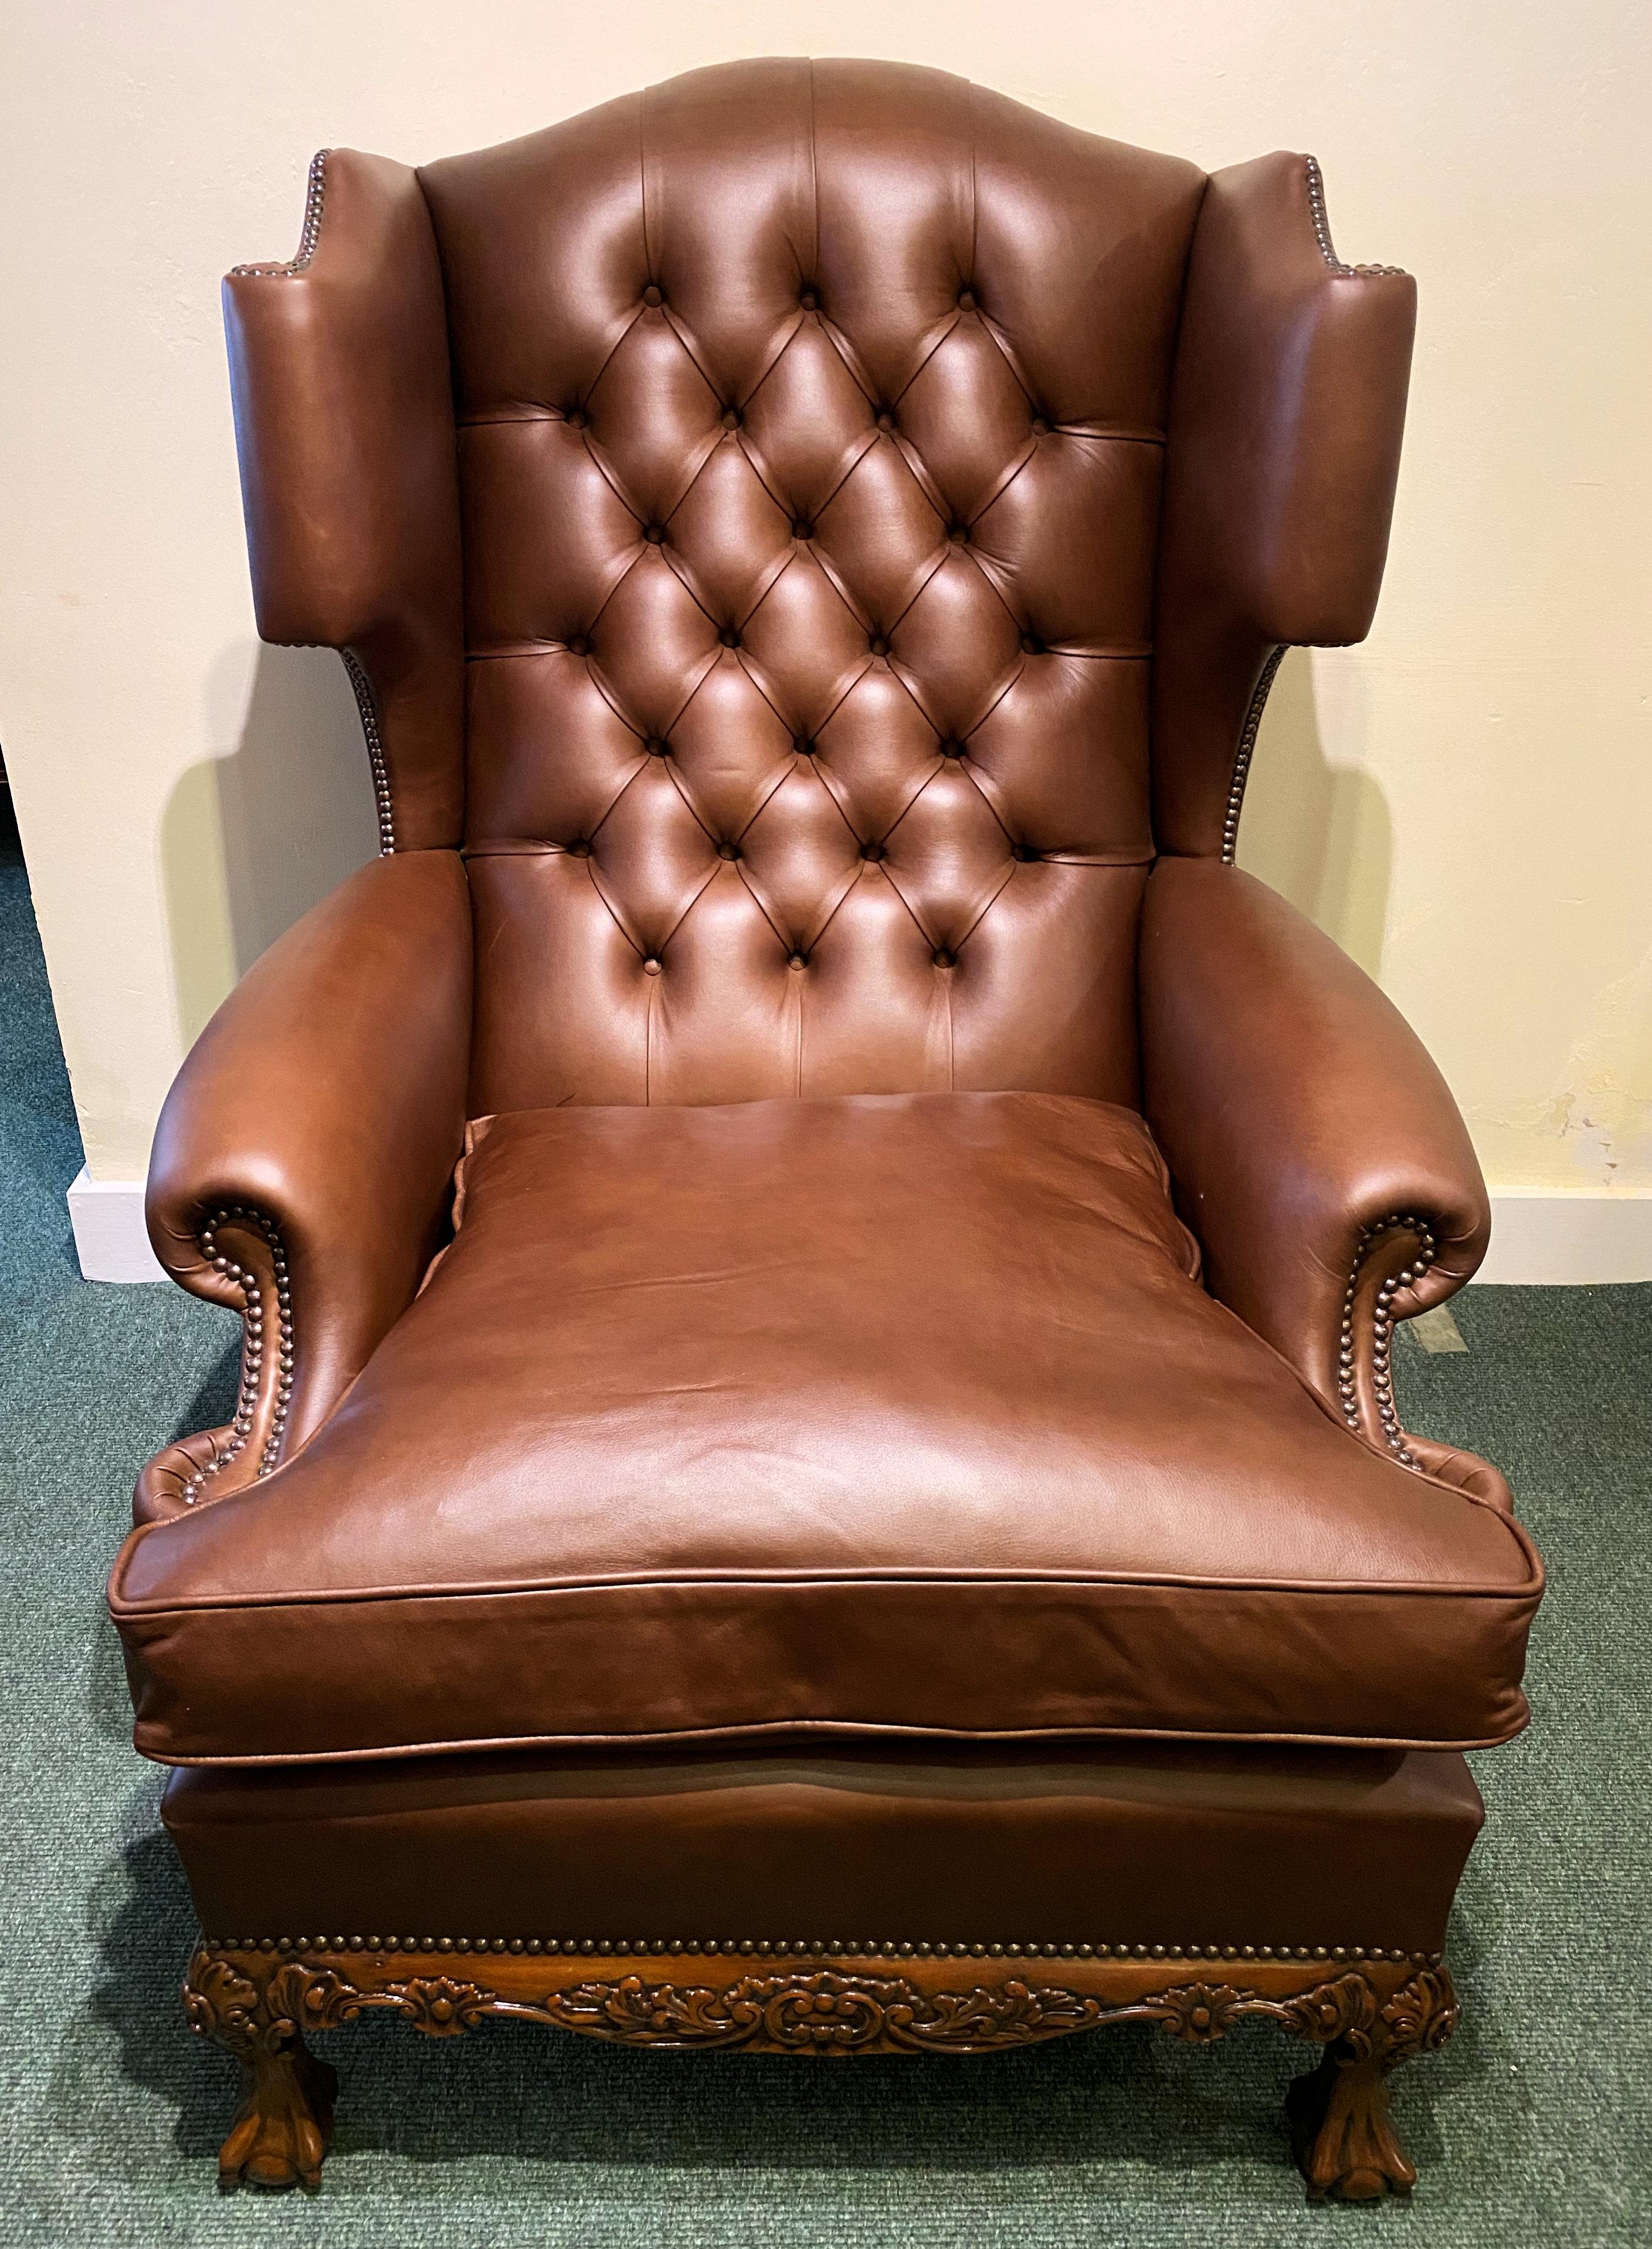 This very unusual looking and handsome Georgian styled English leather wing armchair features a deep buttoned back and scrolled arm rests as well as the winged sides. The chair stands on 4 ball and claw feet with a shaped apron front, all